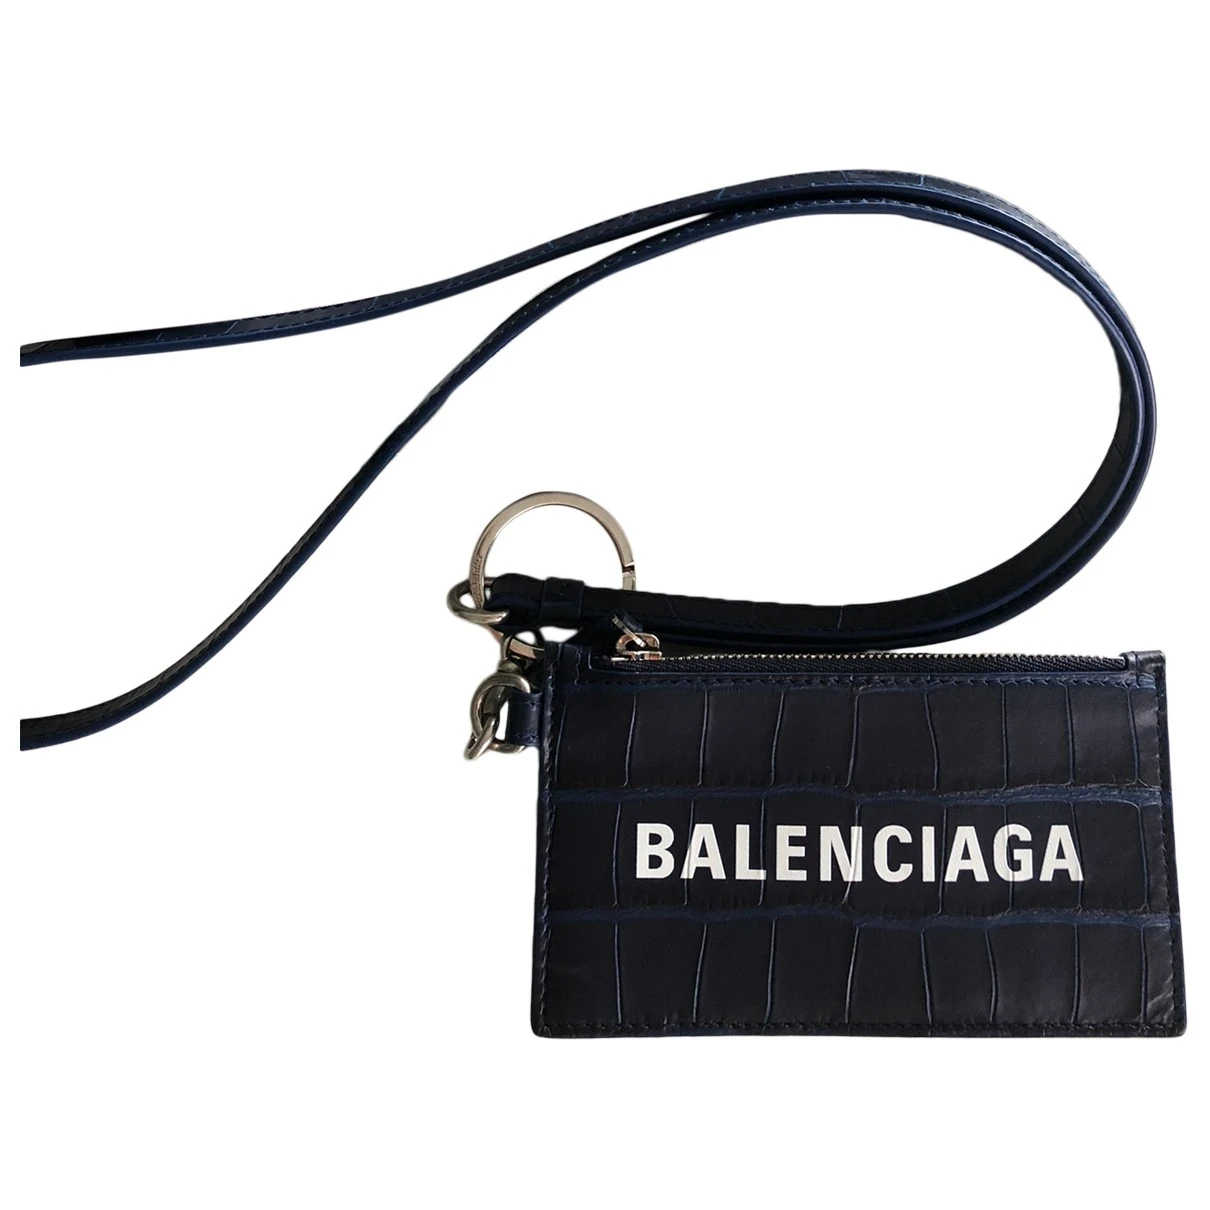 bags Balenciaga small bags, wallets & cases for Male. Used condition